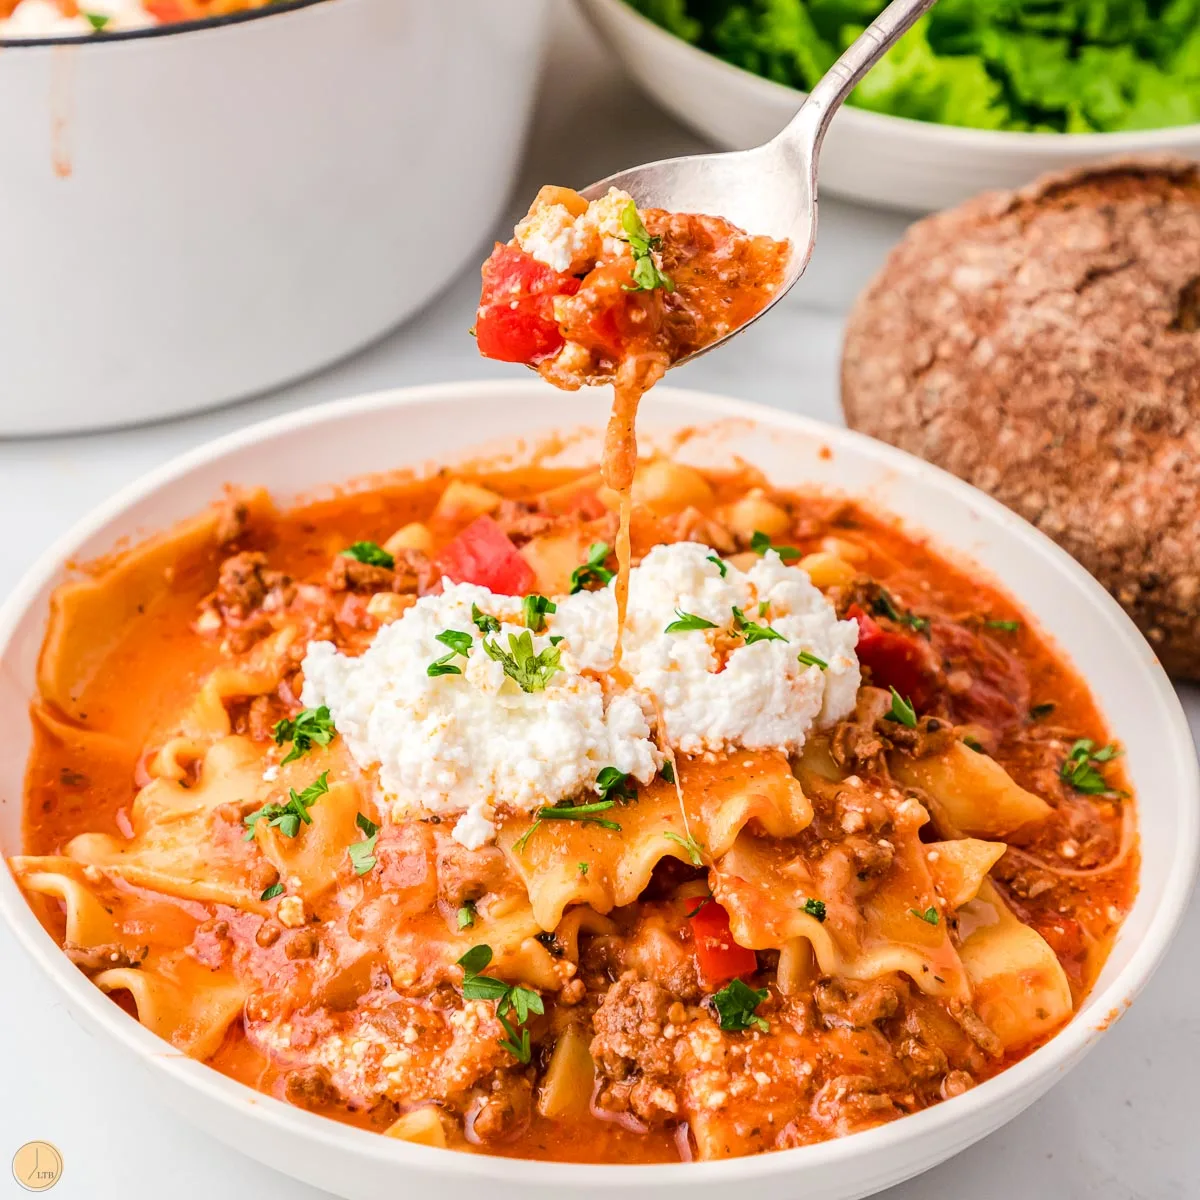 classic flavors of lasagna but in a one pot soup meal